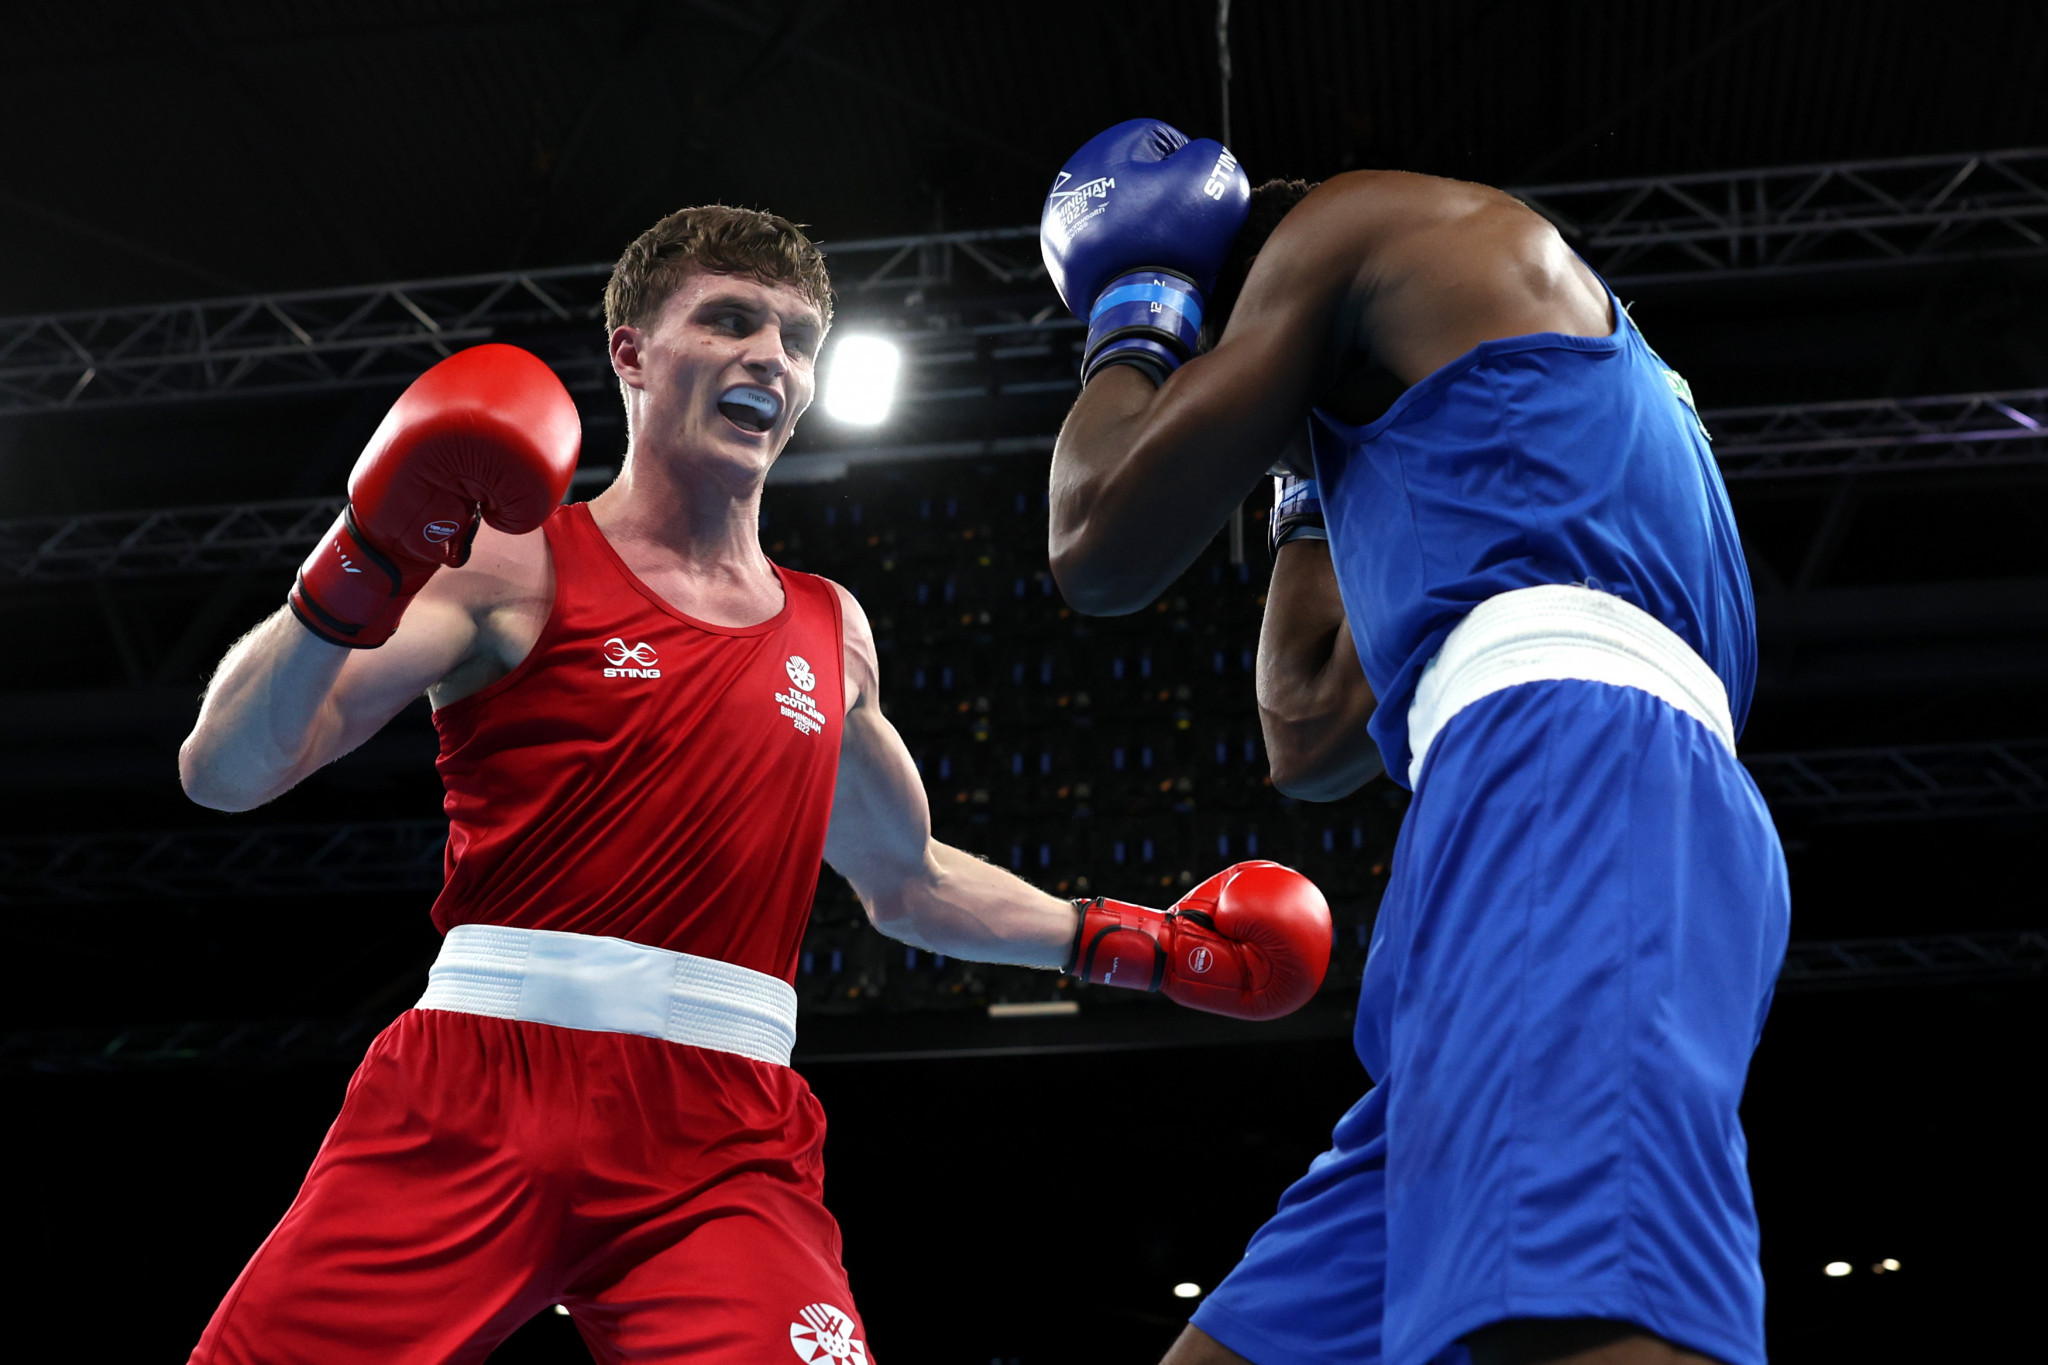 Sam Hickey, in red, was one of three Scots to advance to the boxing semi-finals today ©Getty Images